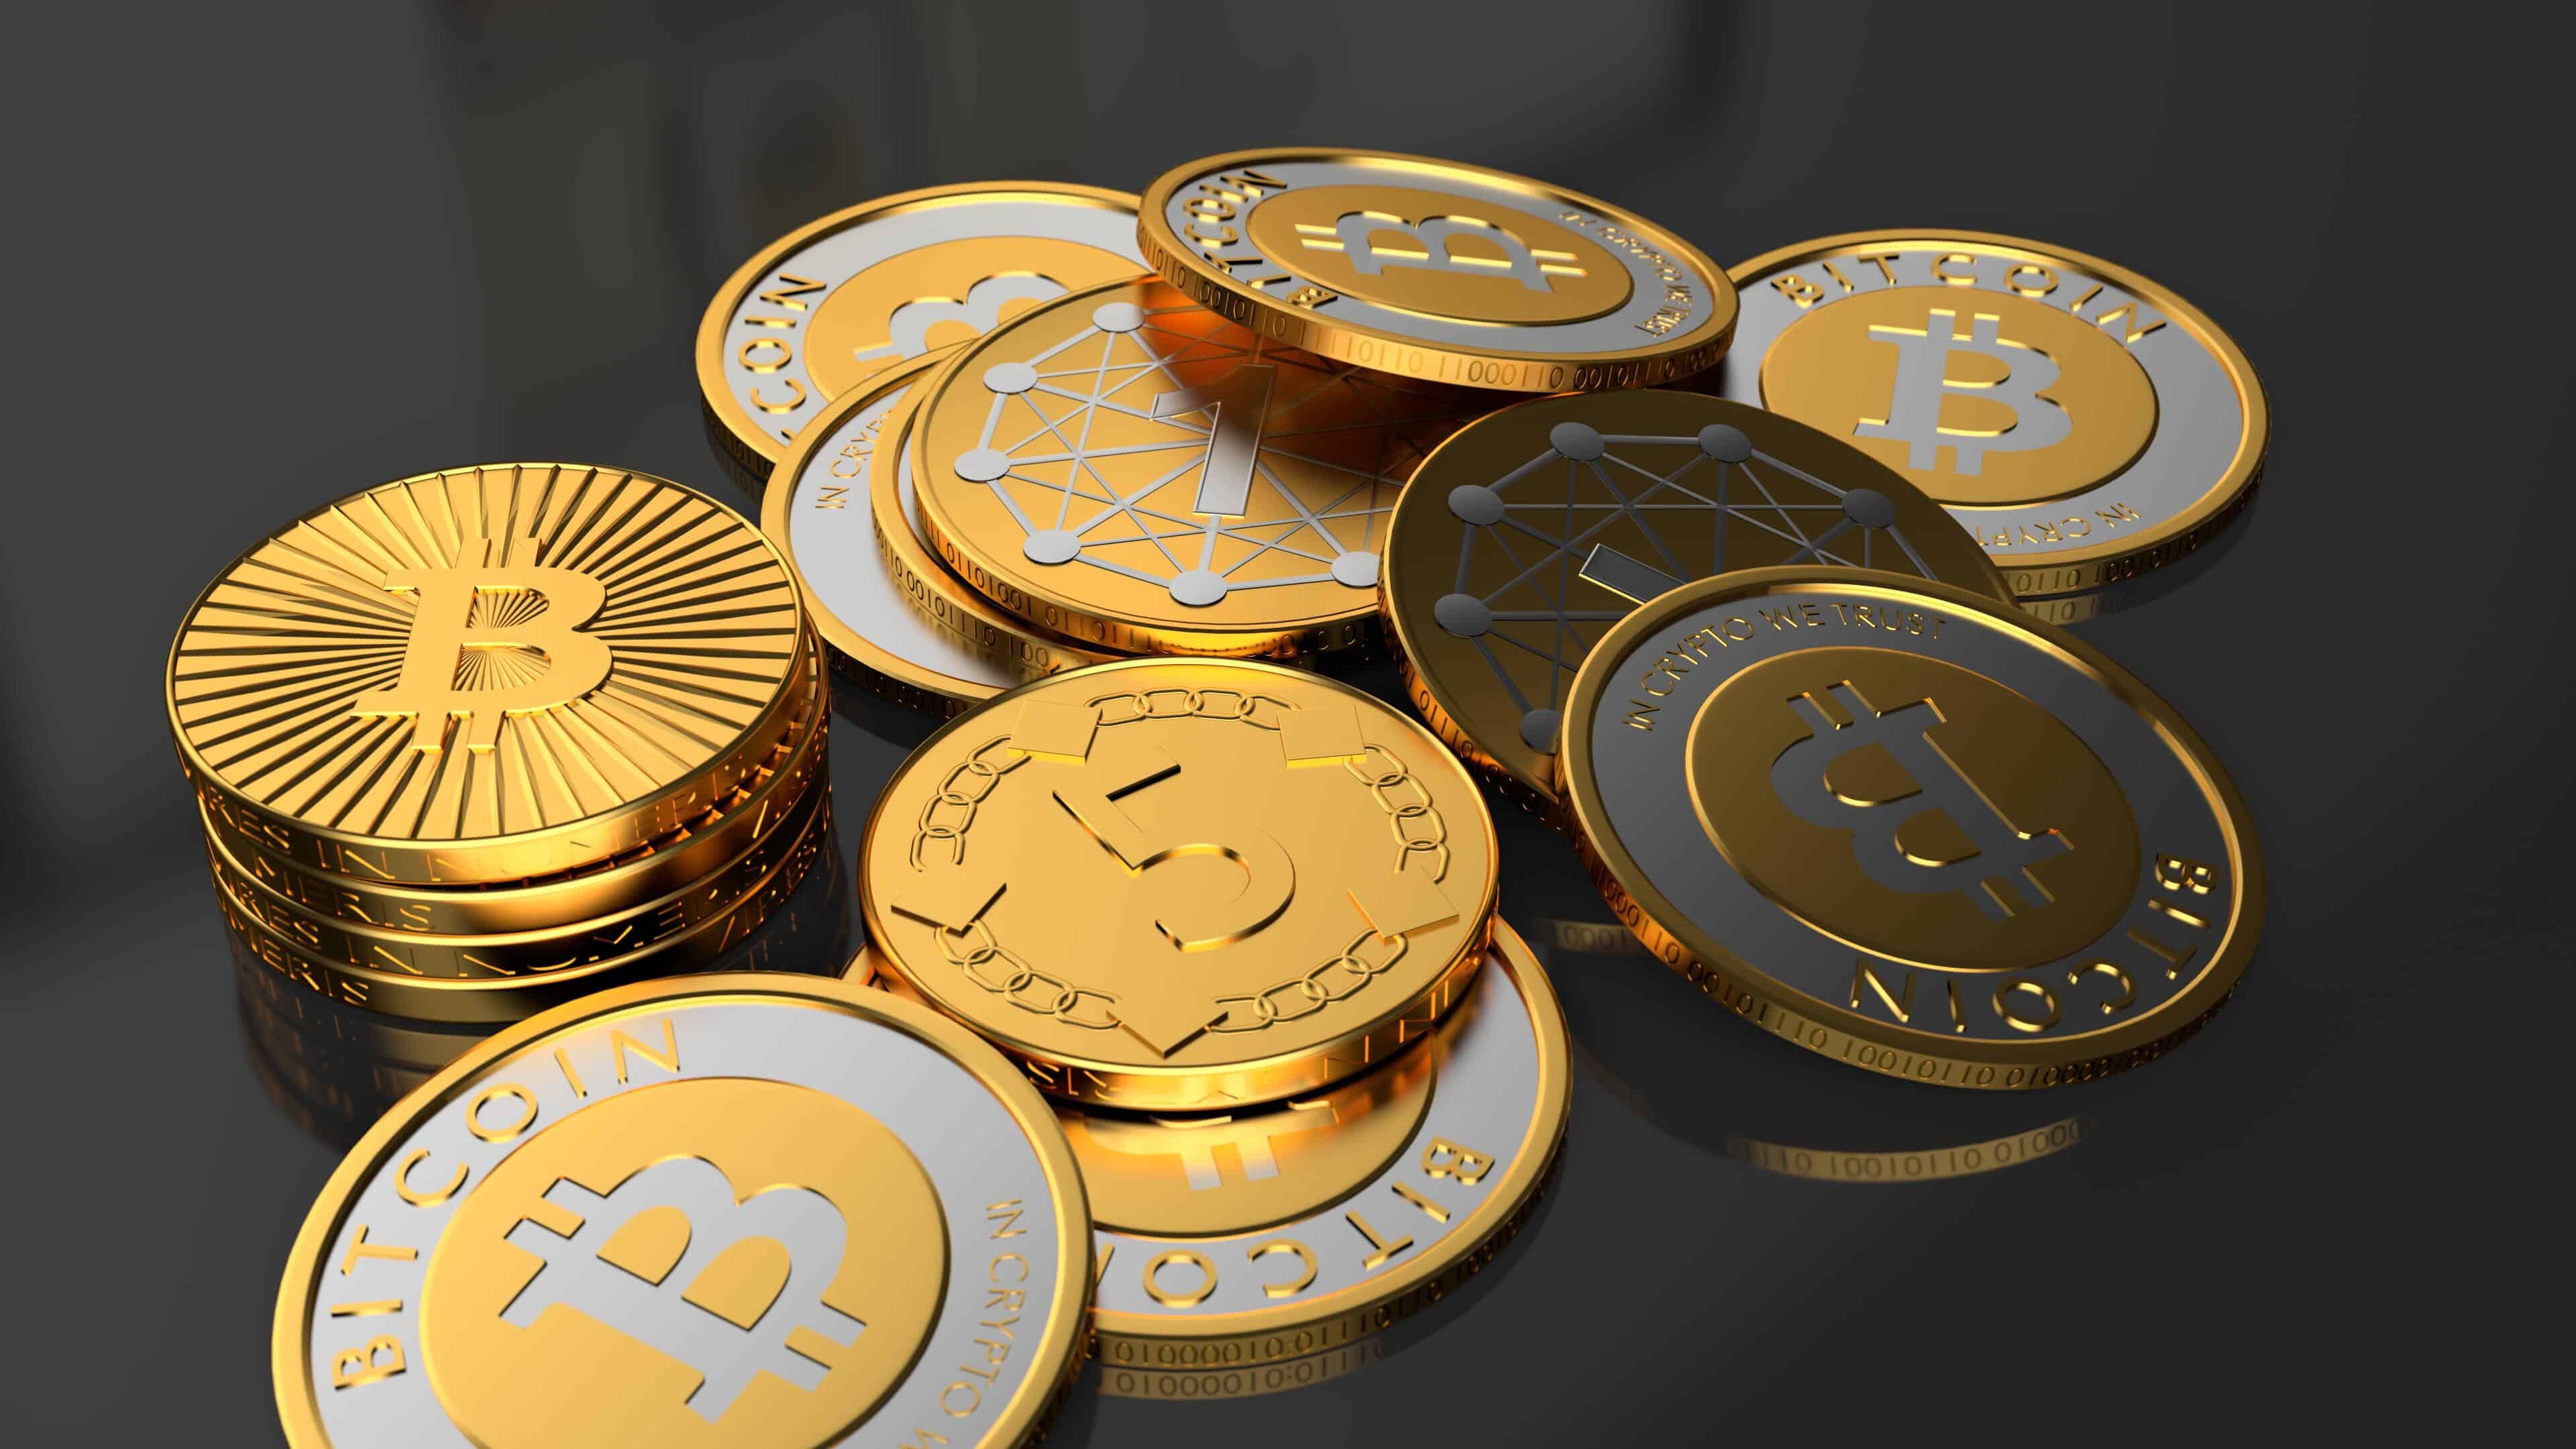 Gold Coins: Bitcoin, A decentralized digital currency that can be transferred on the peer-to-peer bitcoin network. 3840x2160 4K Wallpaper.